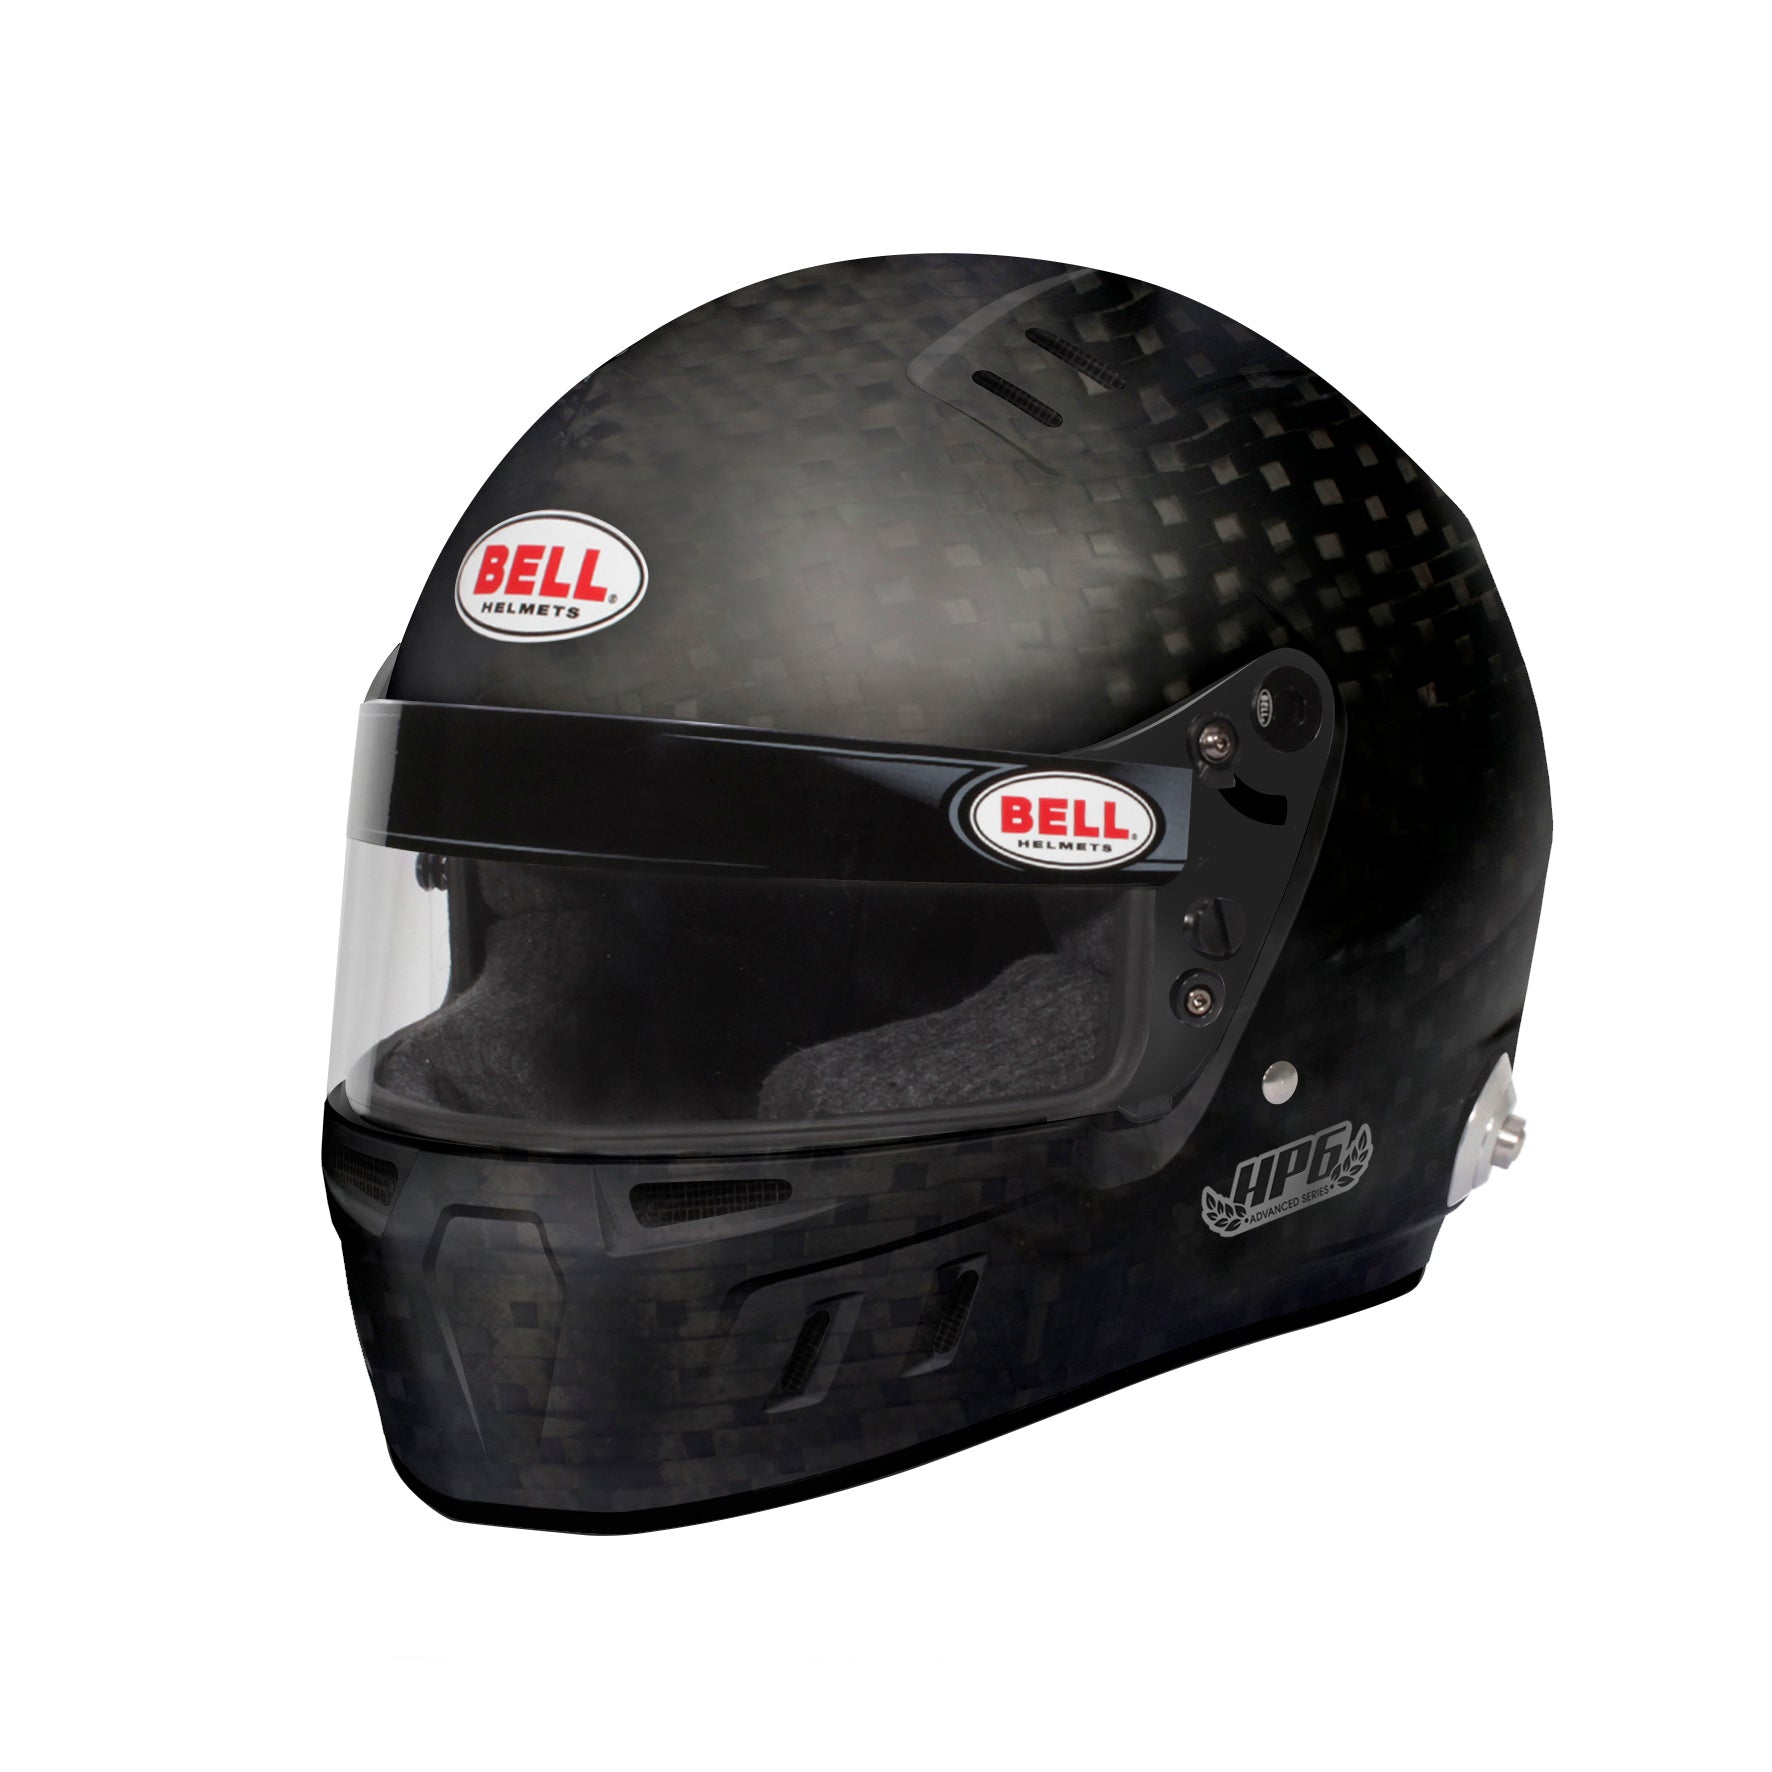 BELL 1140005 HP6 Racing helmet full-face, HANS, FIA8860-2018, carbon, size 58 (7 1/4) Photo-0 